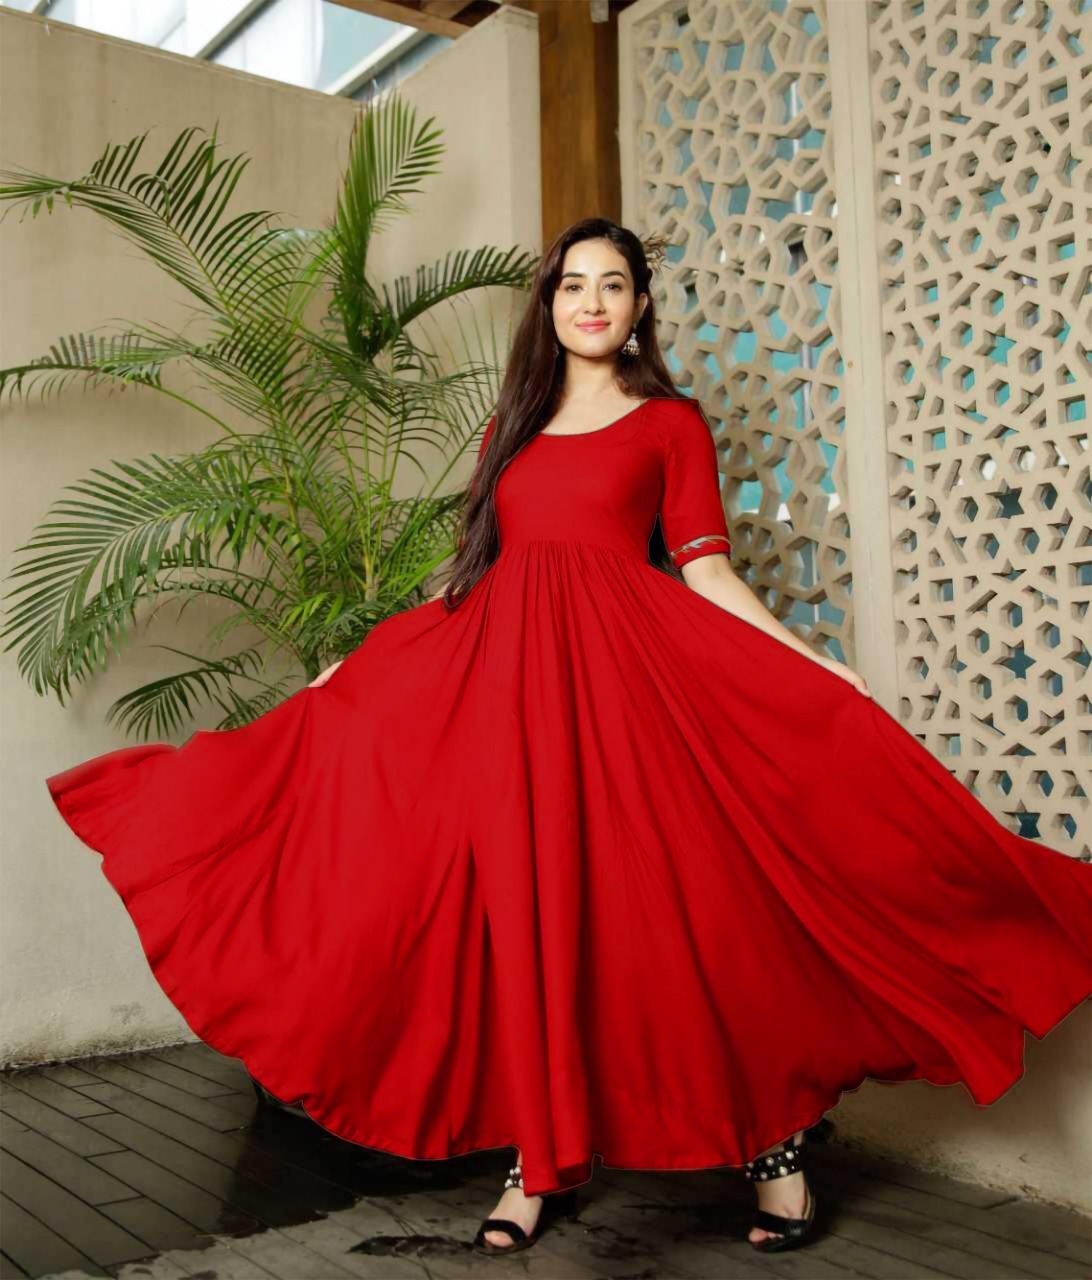 Details more than 160 red colour gown super hot